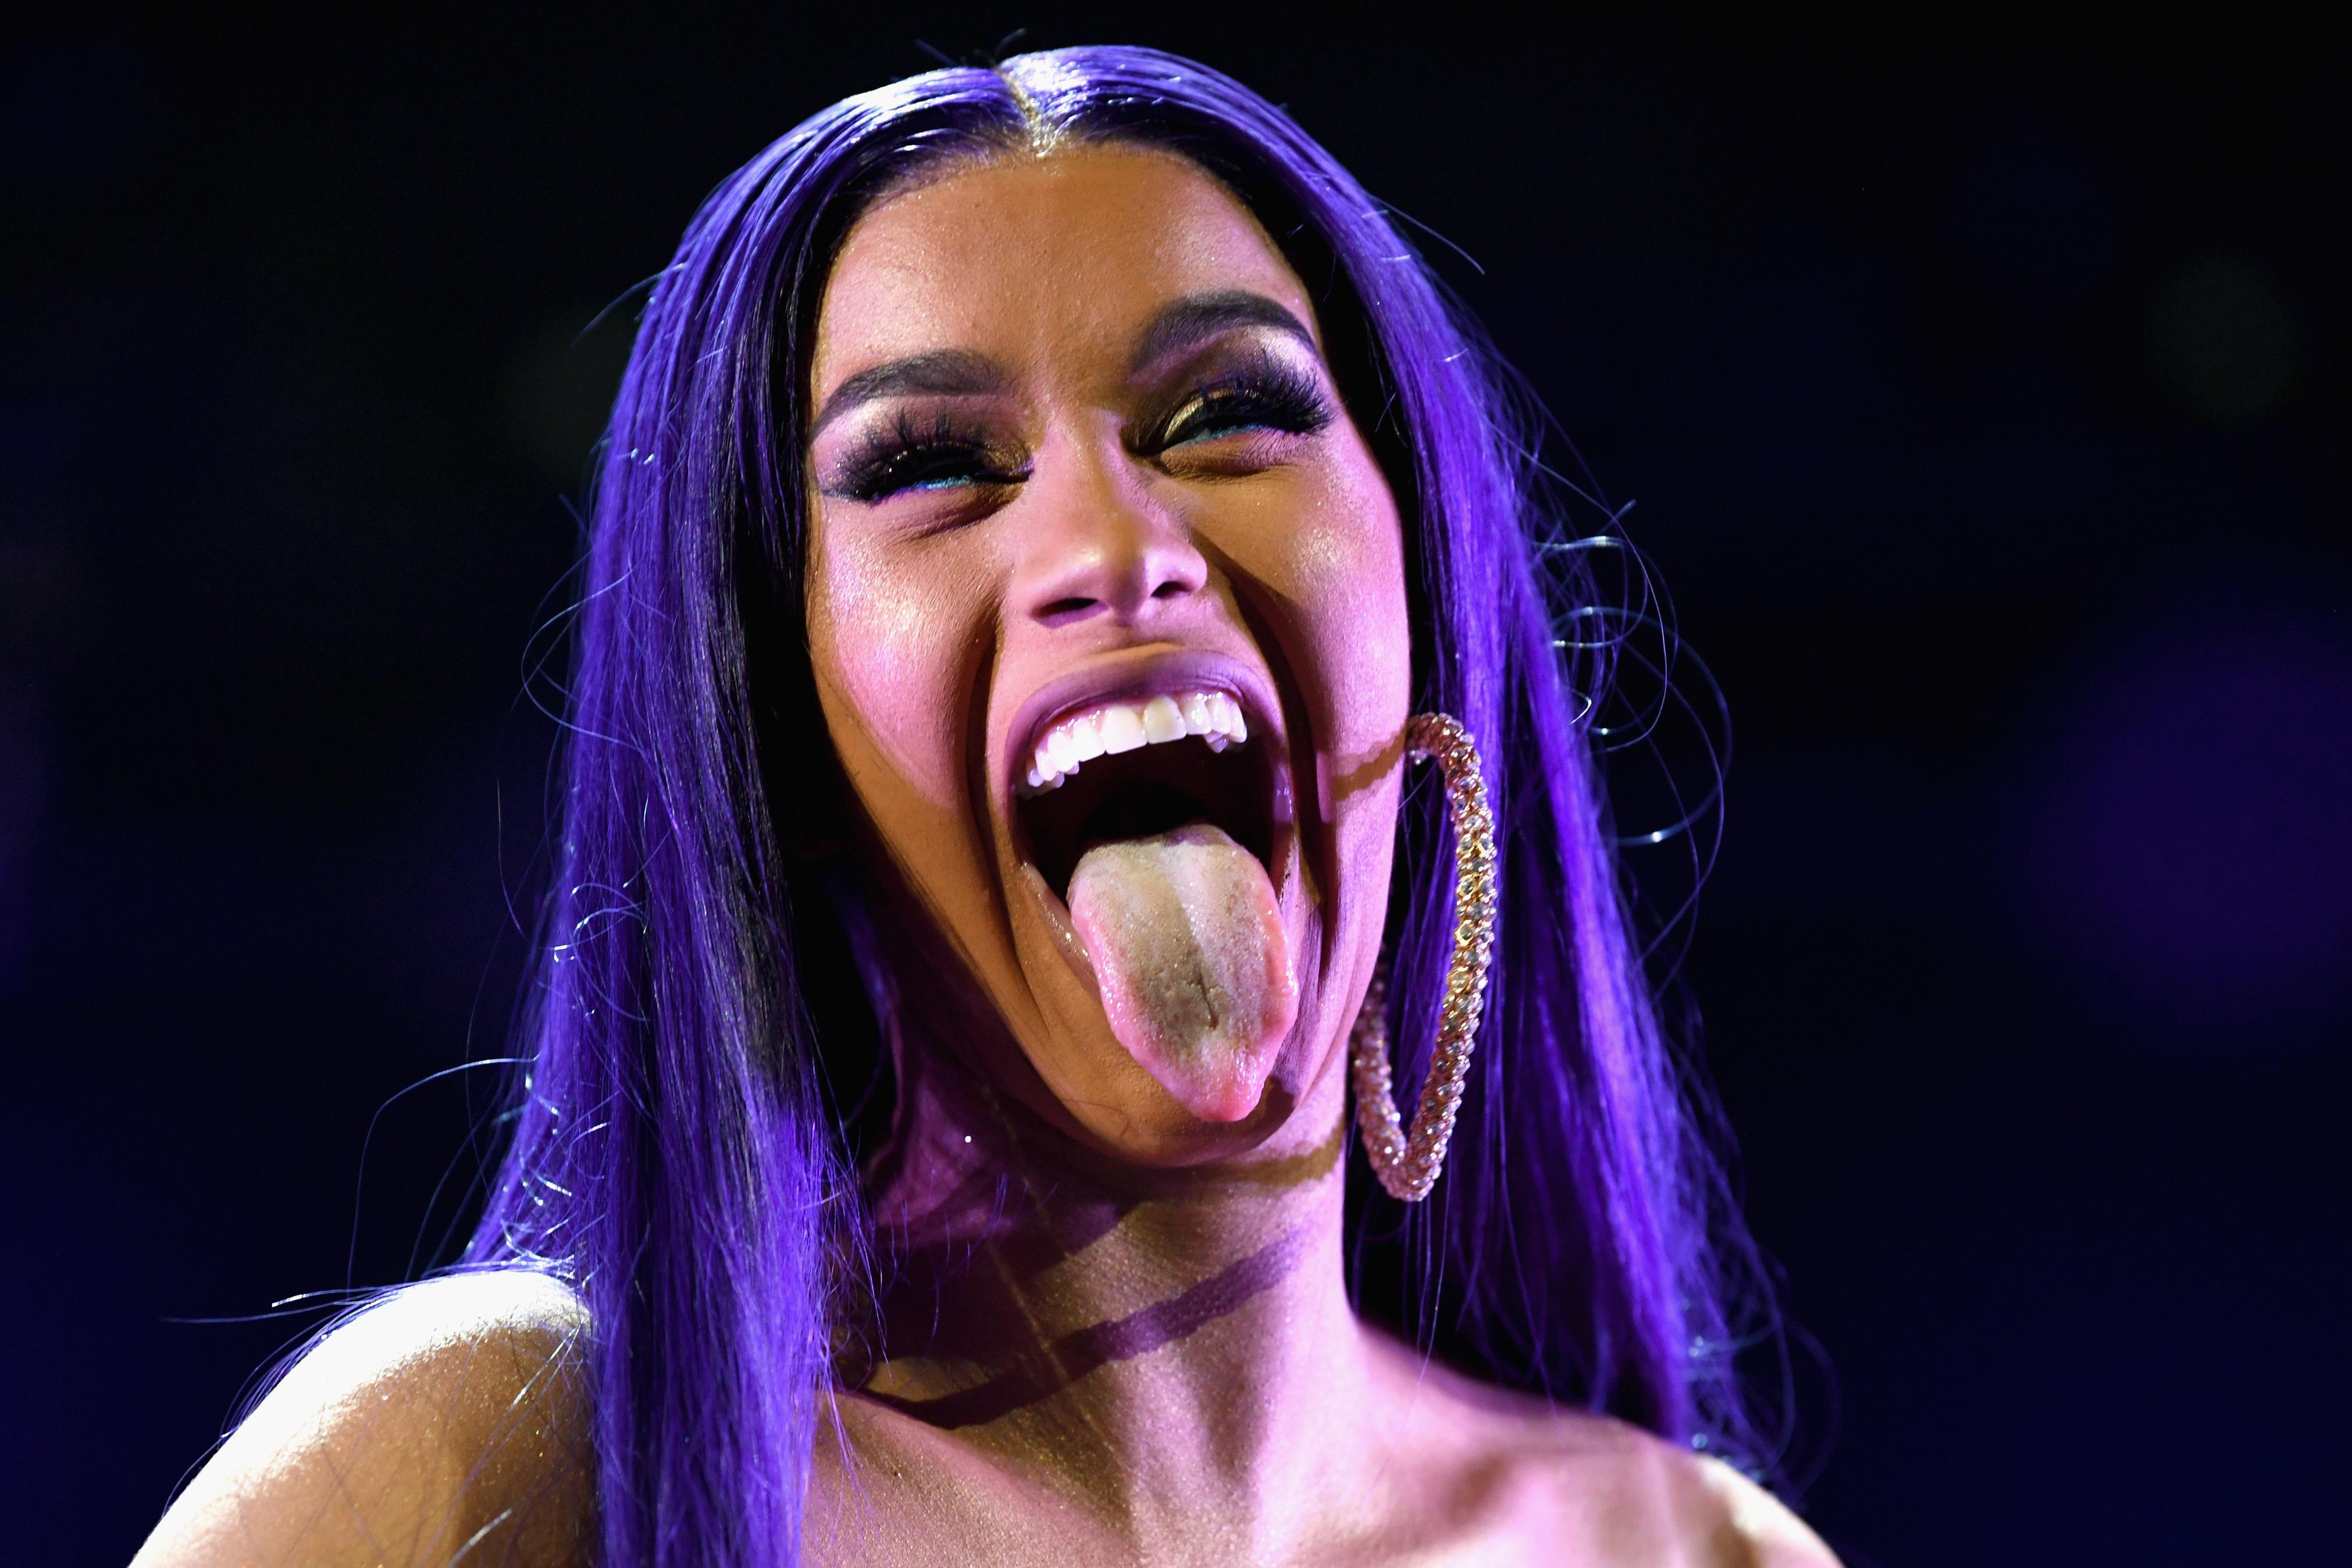 Cardi B sticking out her tongue on stage.